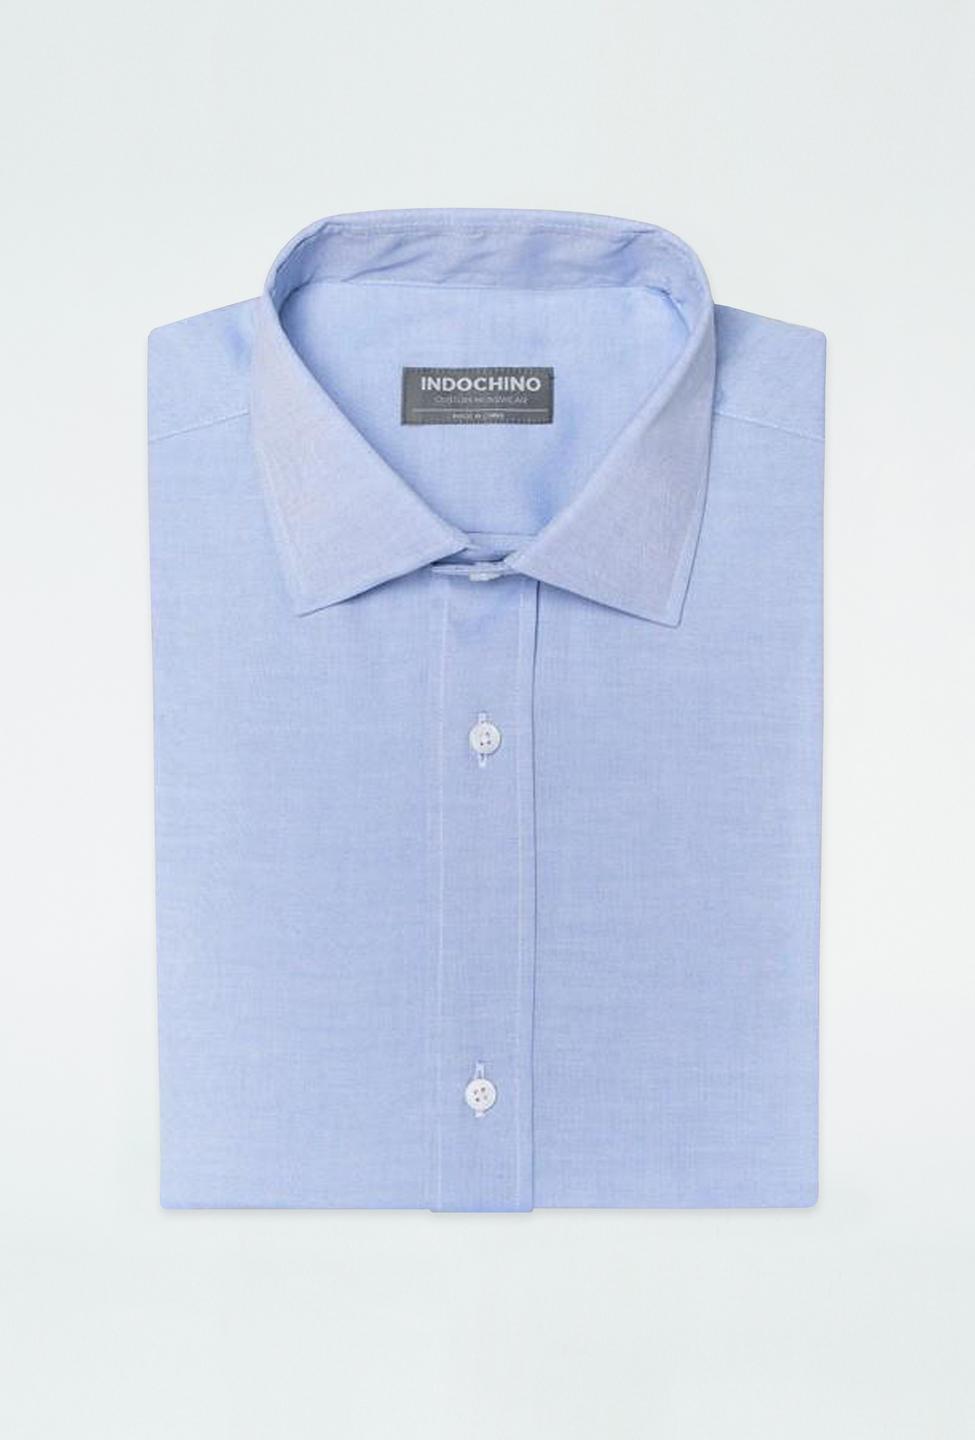 Blue shirt - Helmsley Solid Design from Premium Indochino Collection